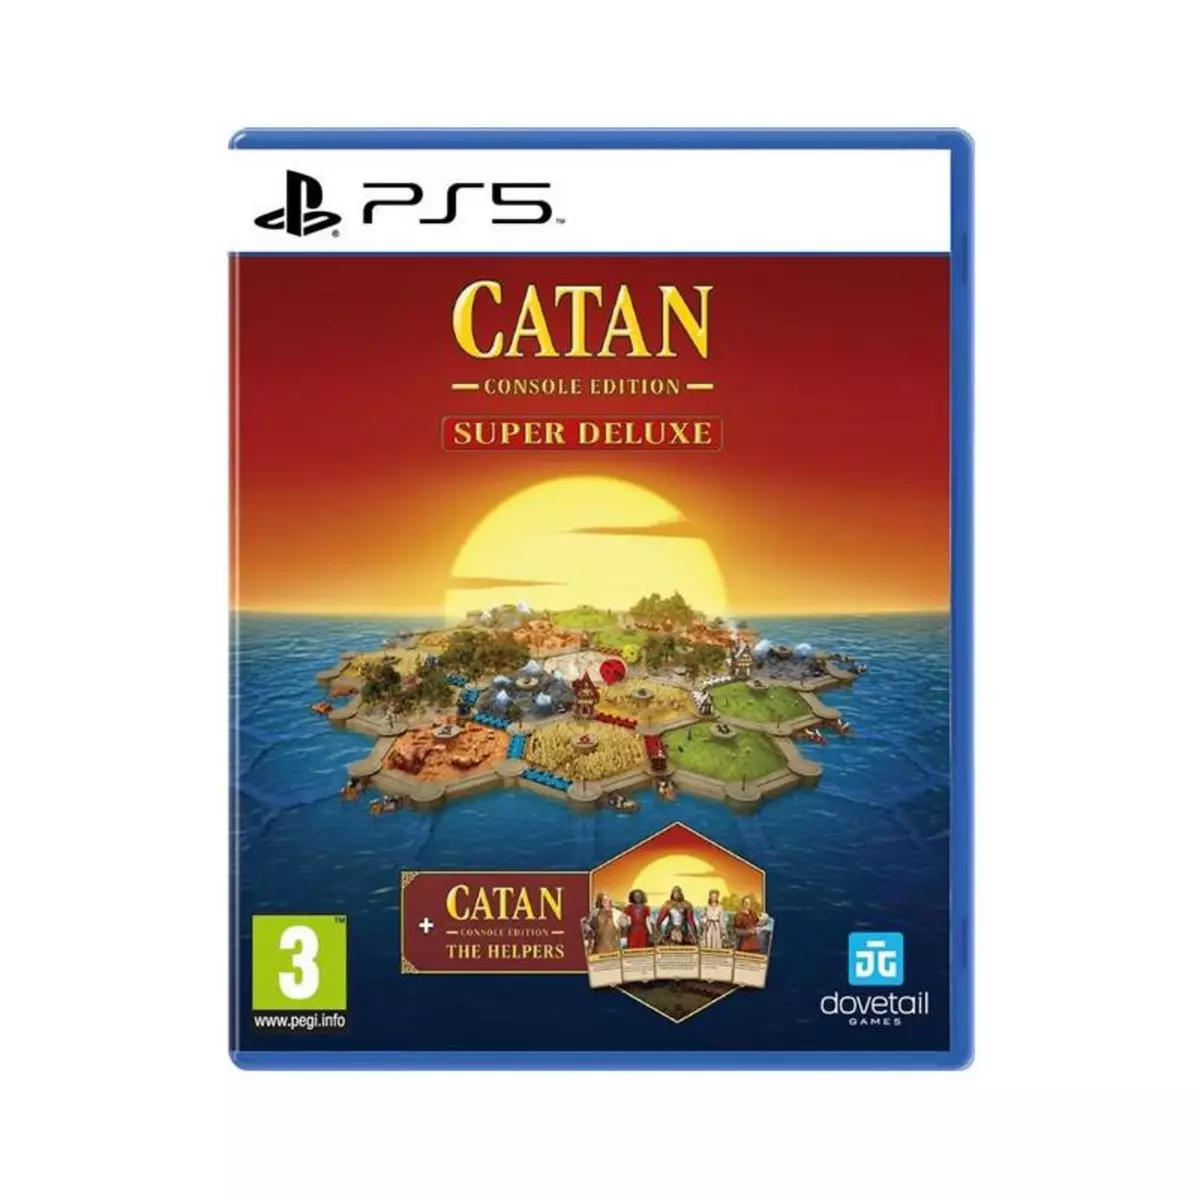 Just for games Catan Console Edition Super Deluxe PS5